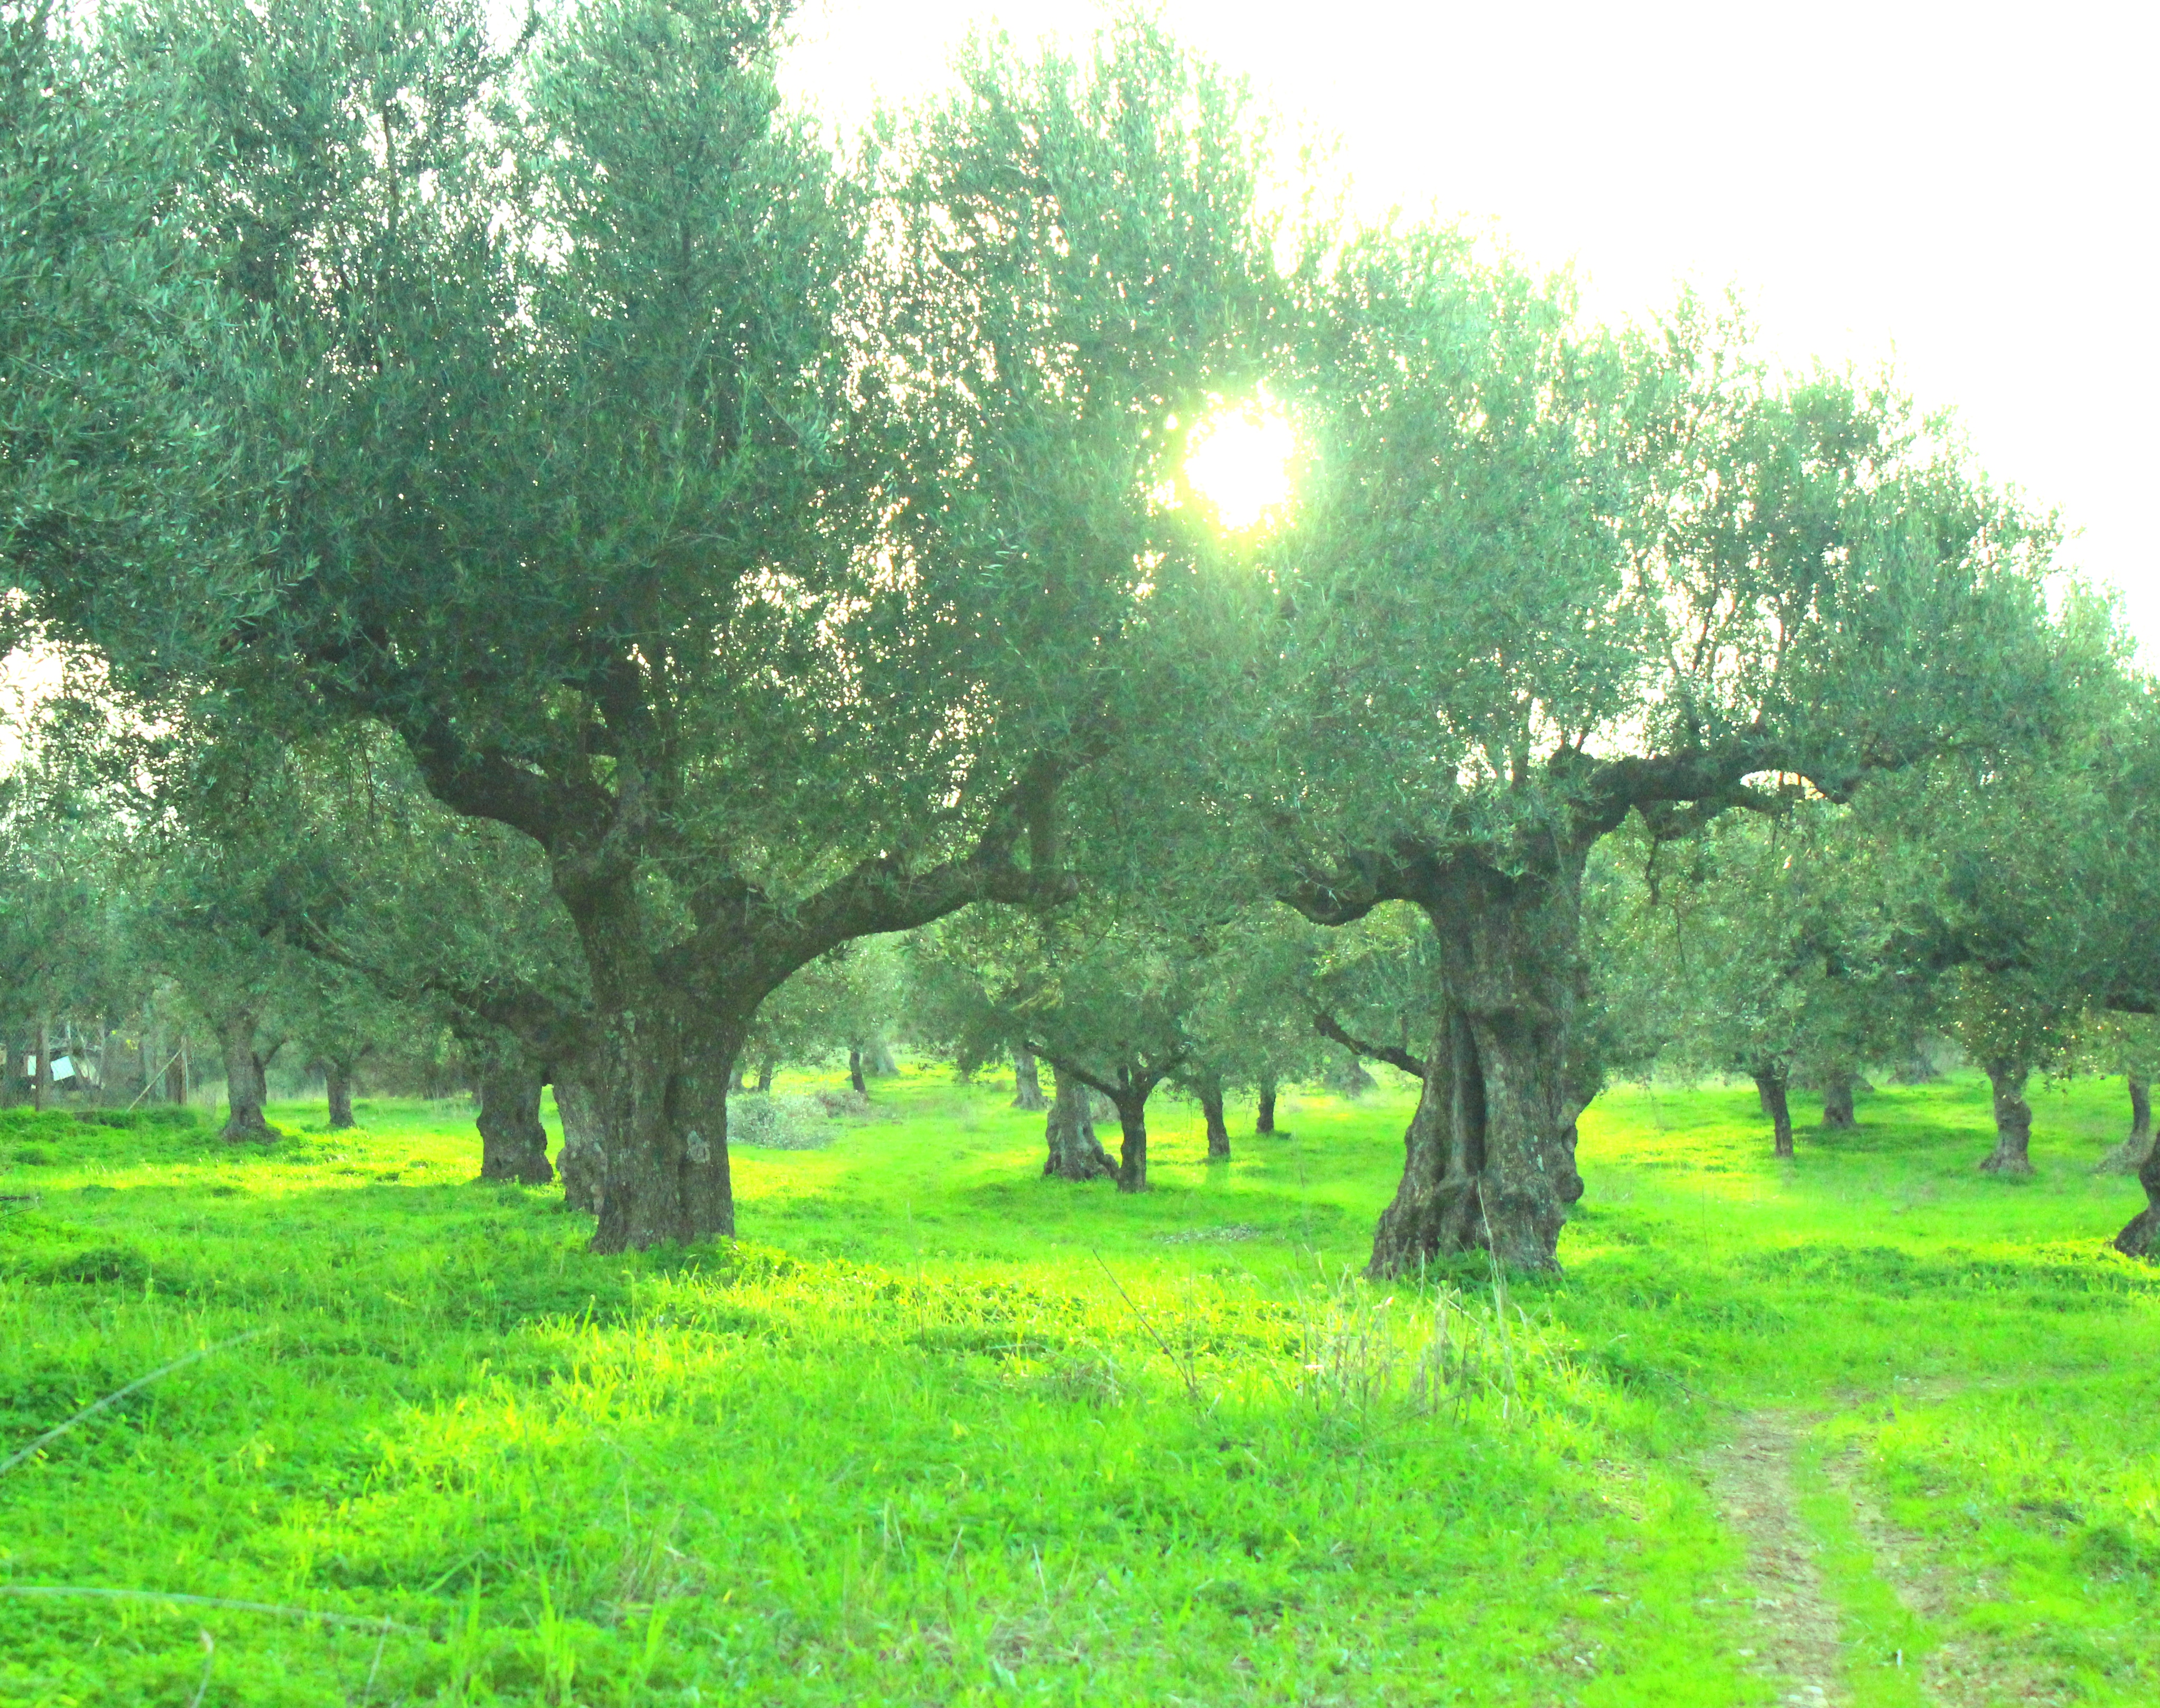 Where does your olive oil come from?